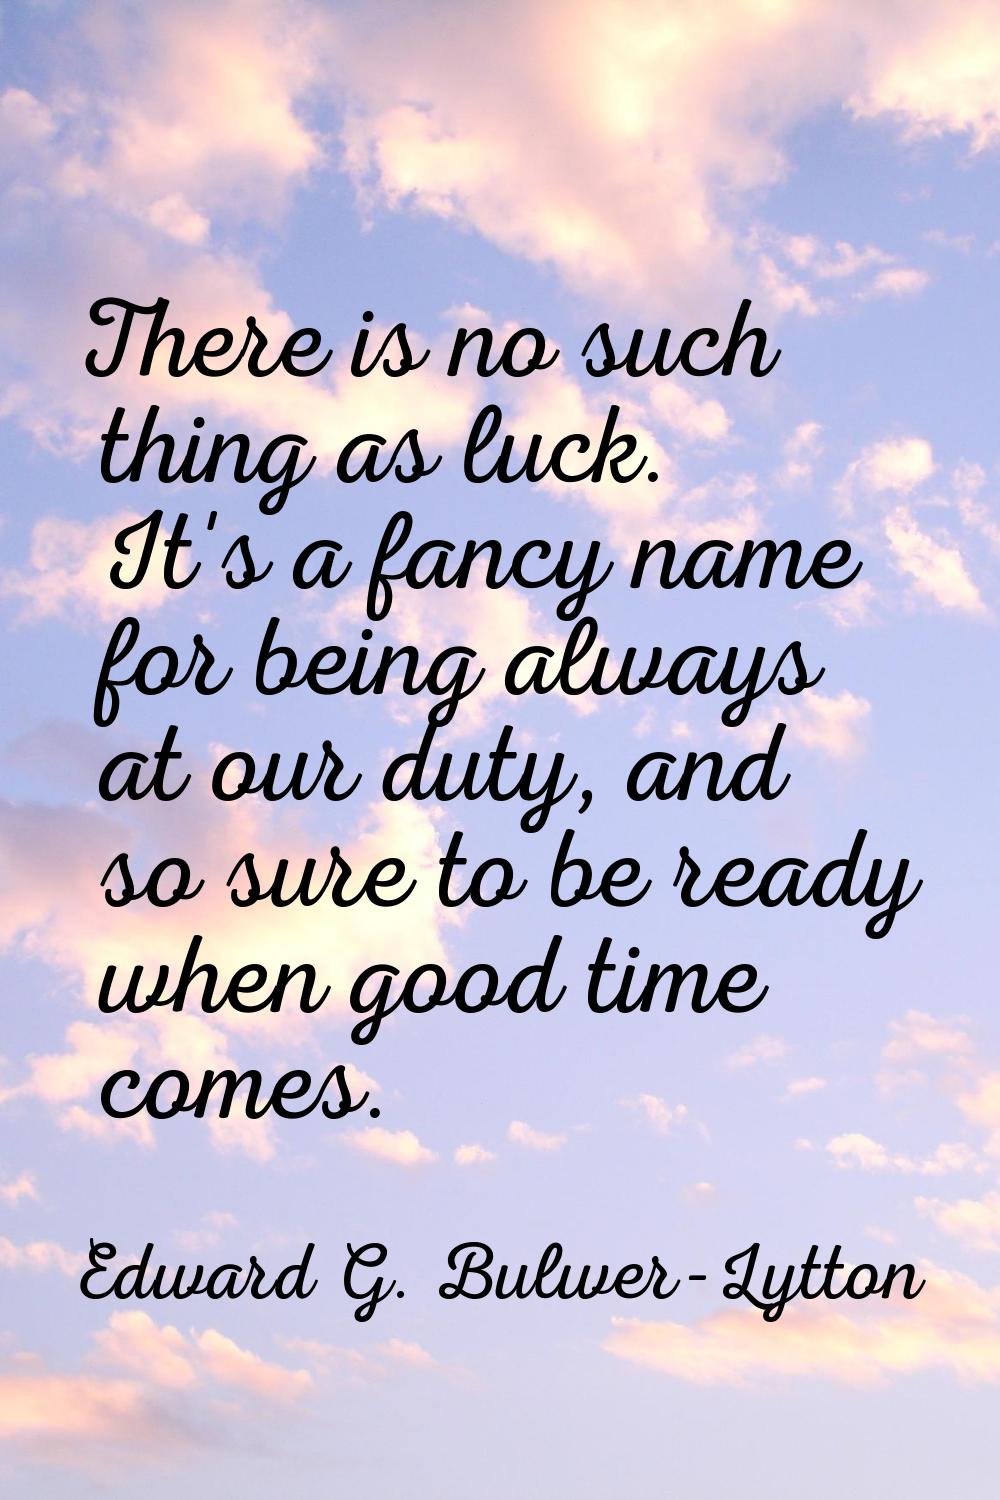 There is no such thing as luck. It's a fancy name for being always at our duty, and so sure to be r